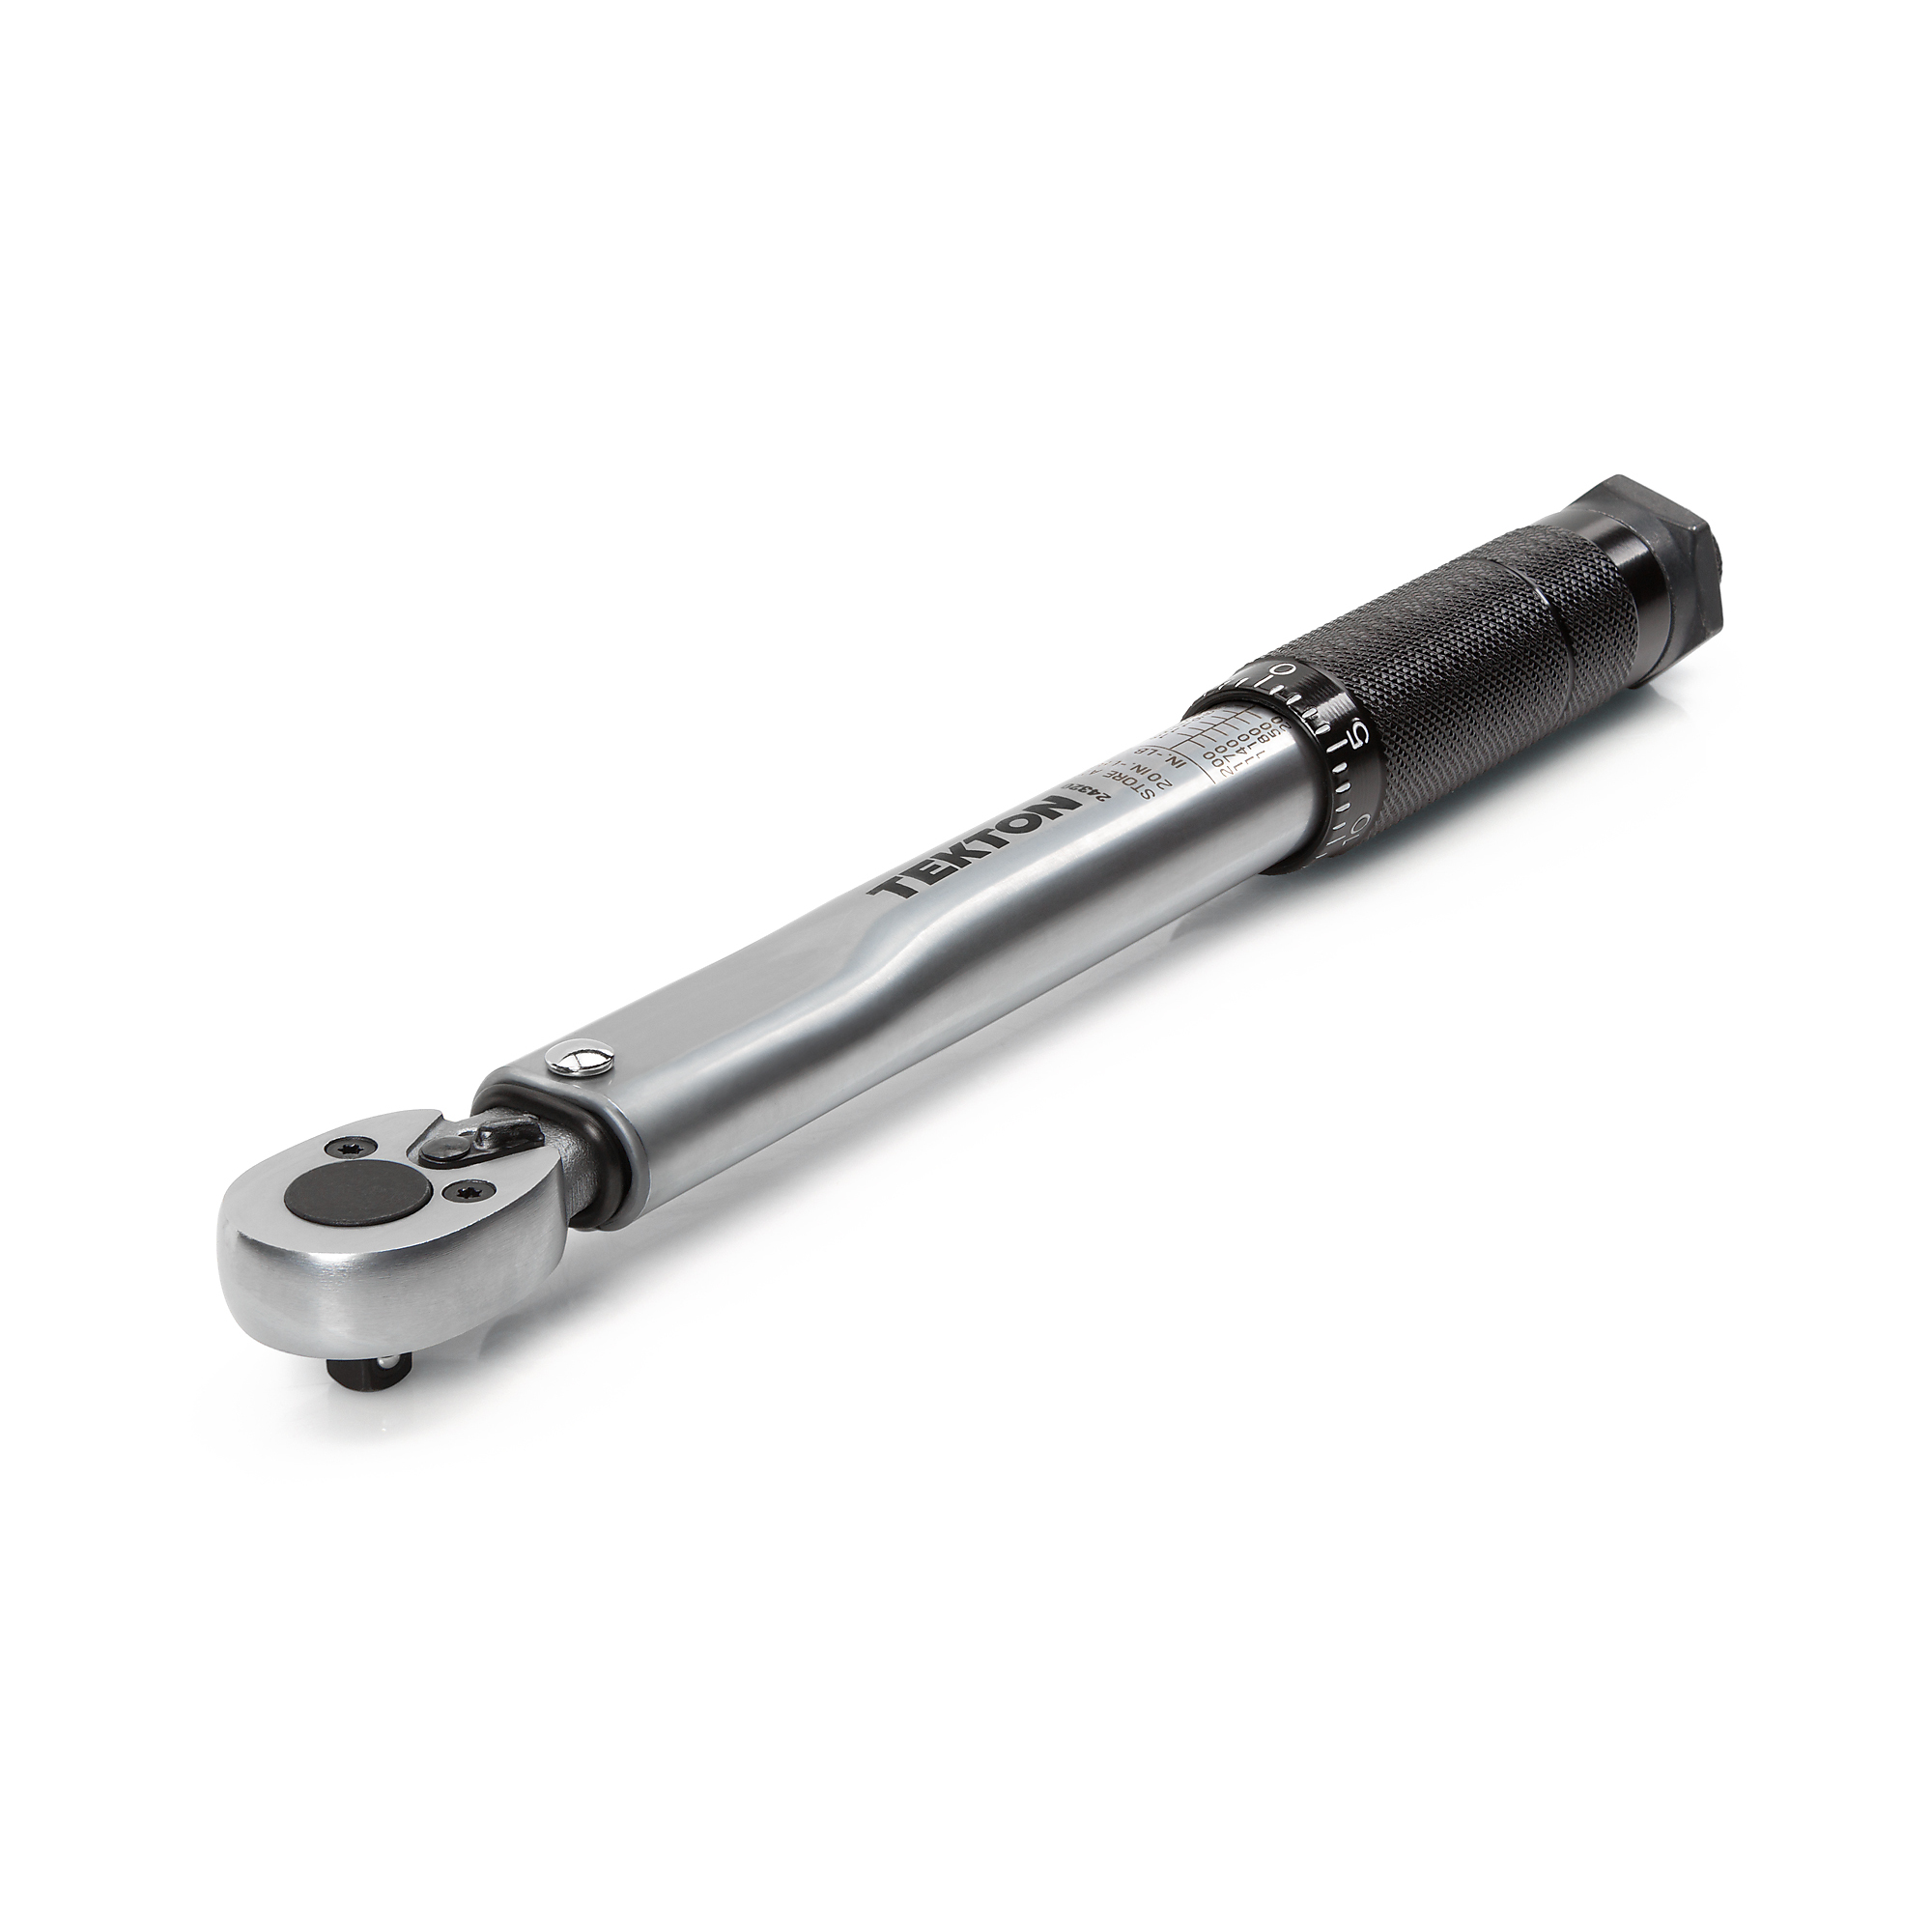 Tekton, 1/4Inch Drive Torque Wrench (20-200Inch-lb.), Pieces (qty.) 1 Measurement Standard Standard (SAE), Model 24320